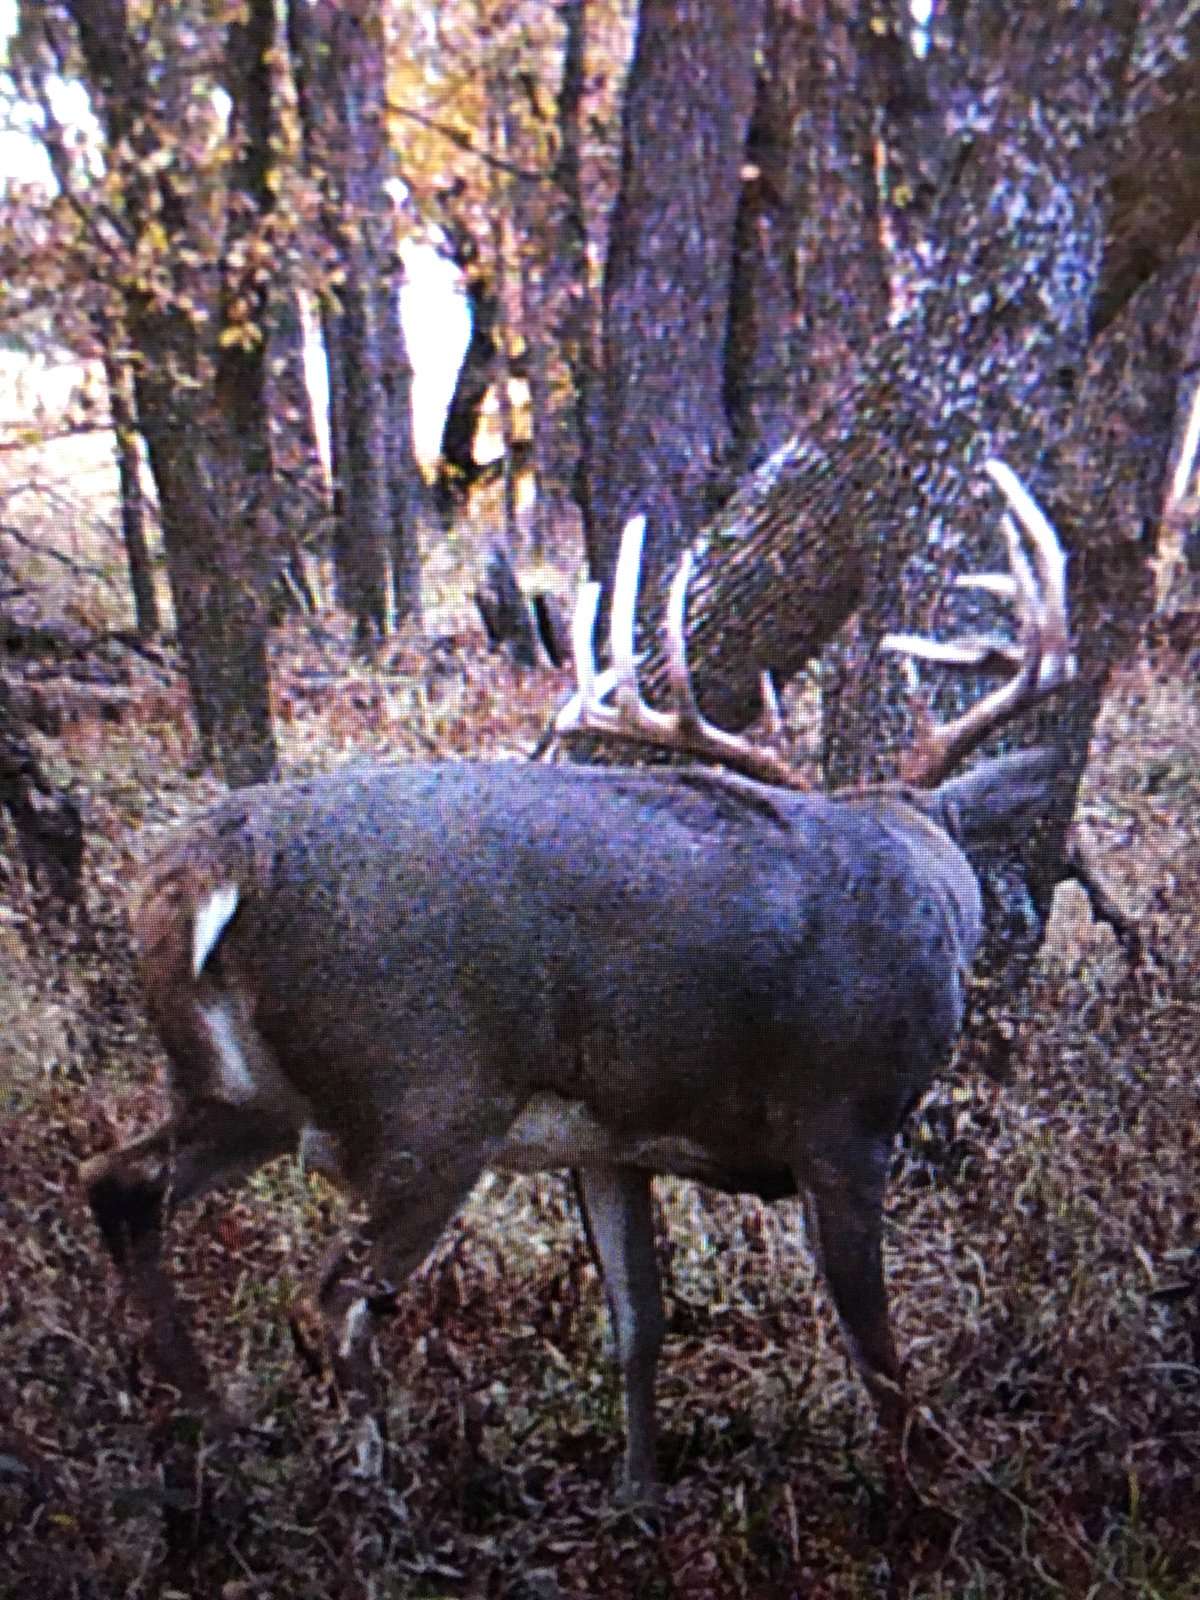 A neighbor shared a trail camera photo of Priest's deer. 